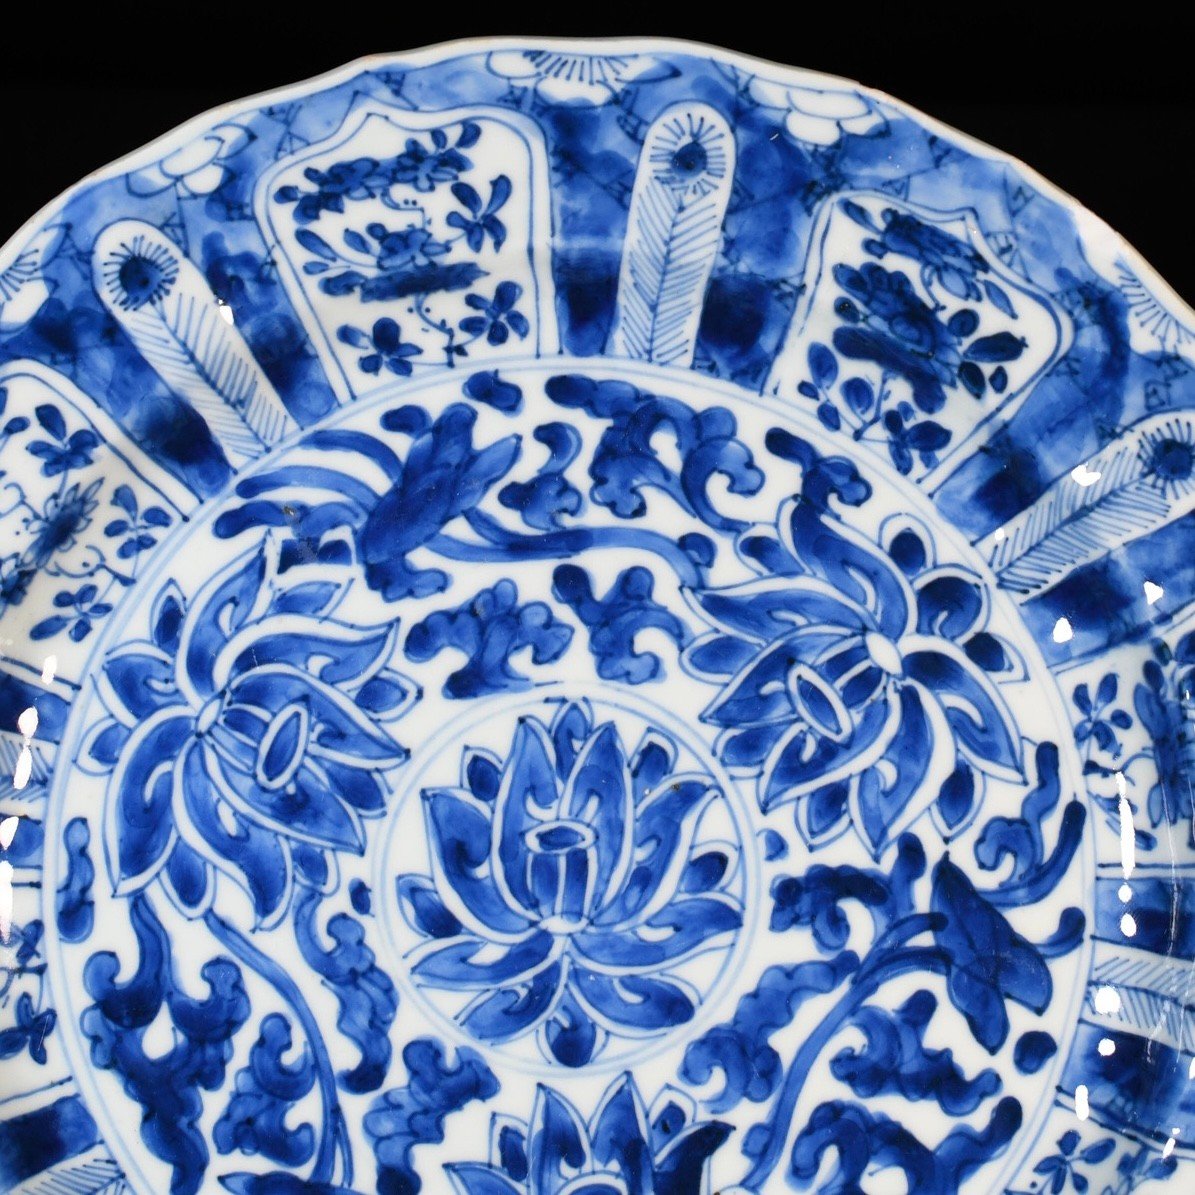 Blue And White Porcelain Dish With Floral Decor In Cartouches - China 18th Kangxi Period-photo-1